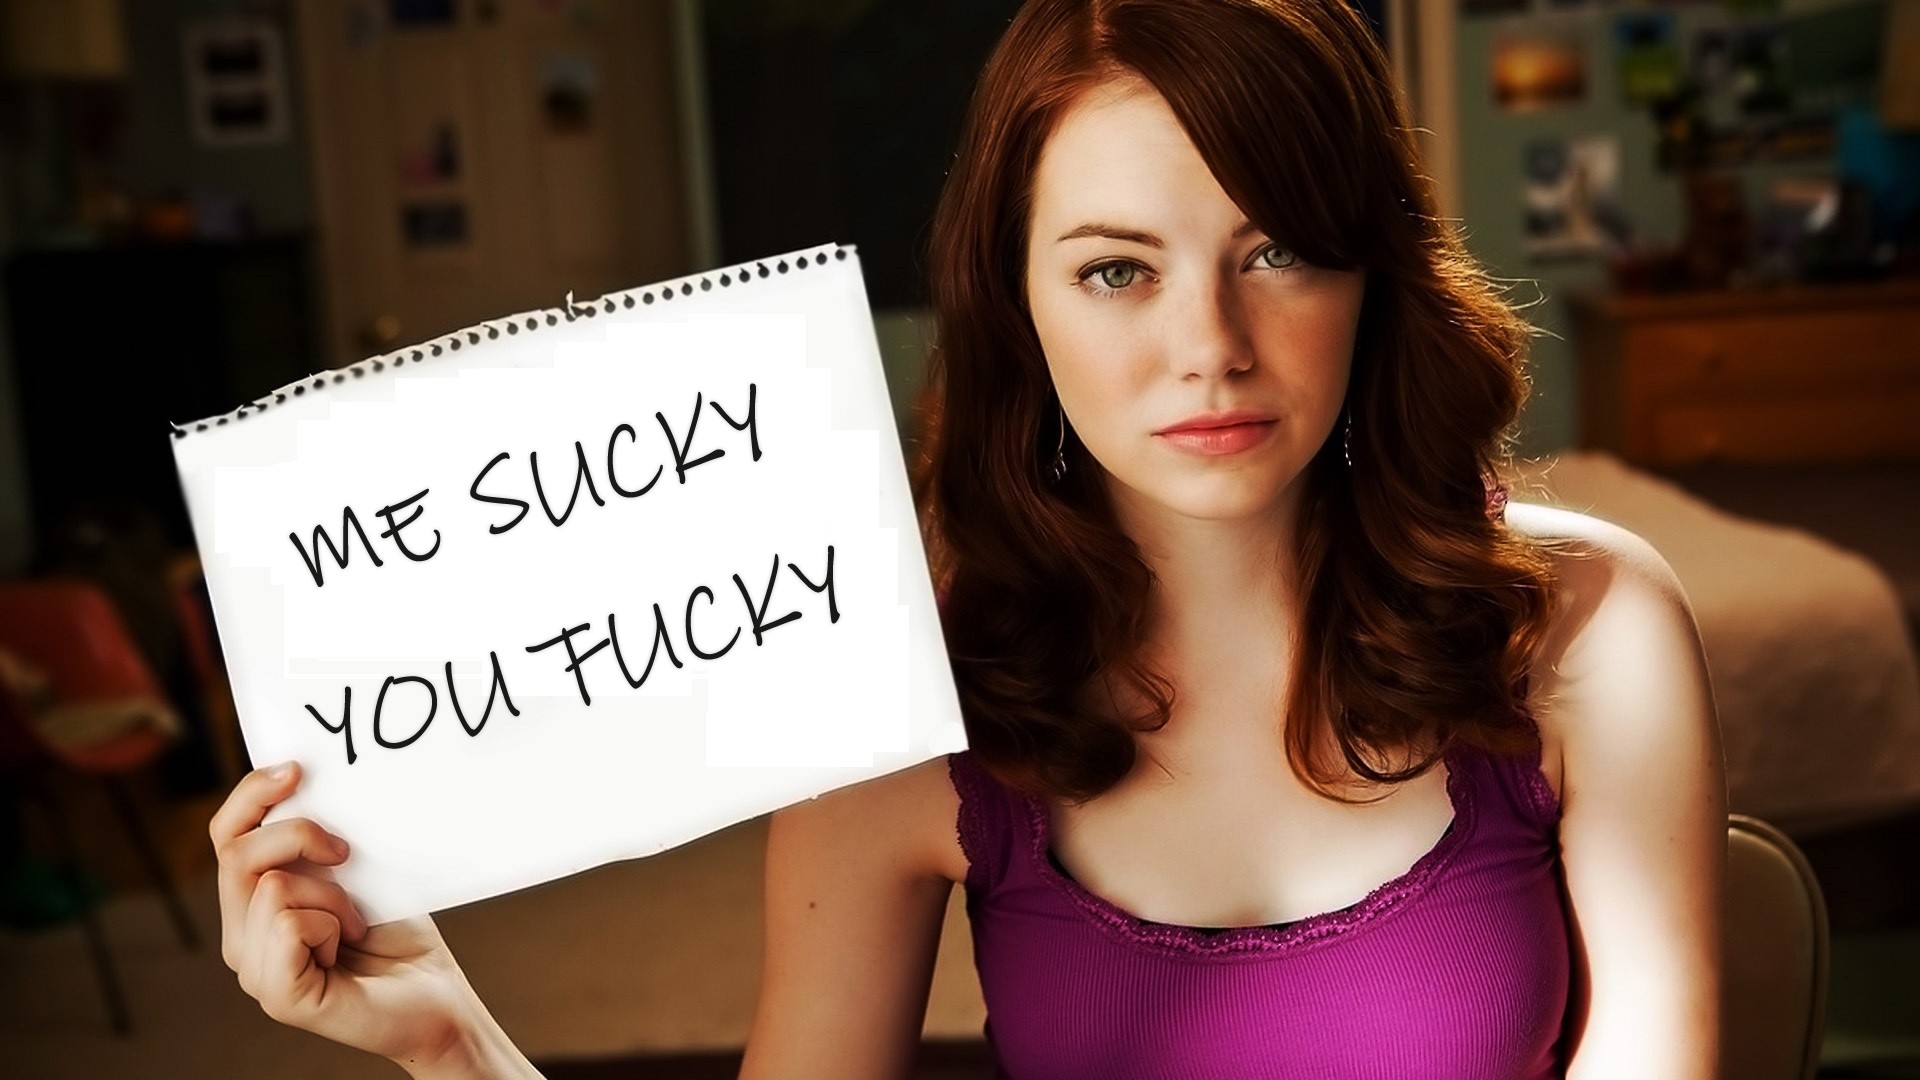 People 1920x1080 Easy A Emma Stone movies women face fuck frontal view highly sexual text